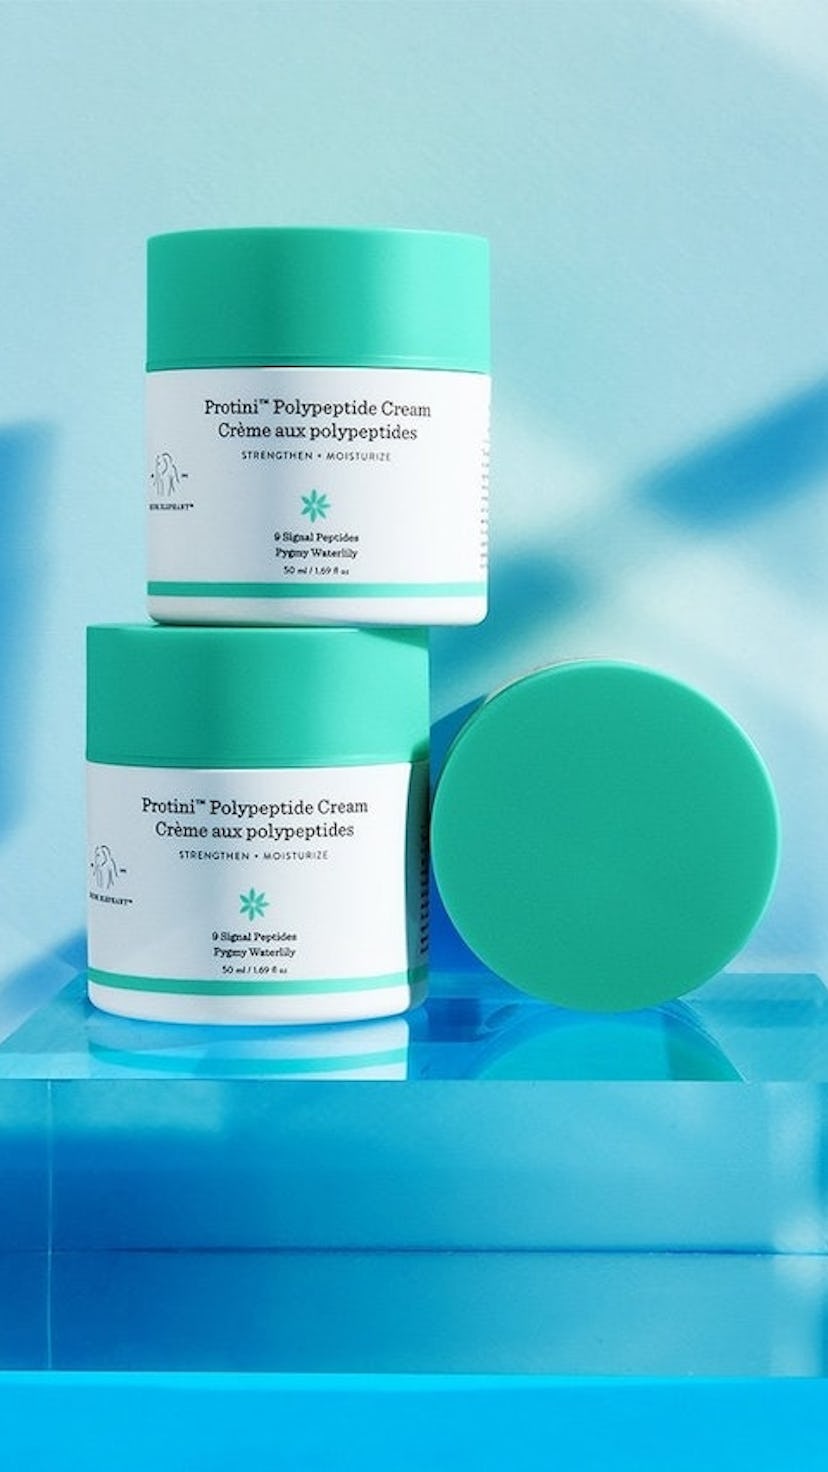 Three bottles of Drunk Elephant's Protini Polypeptide Cream, which has affordable dupes.